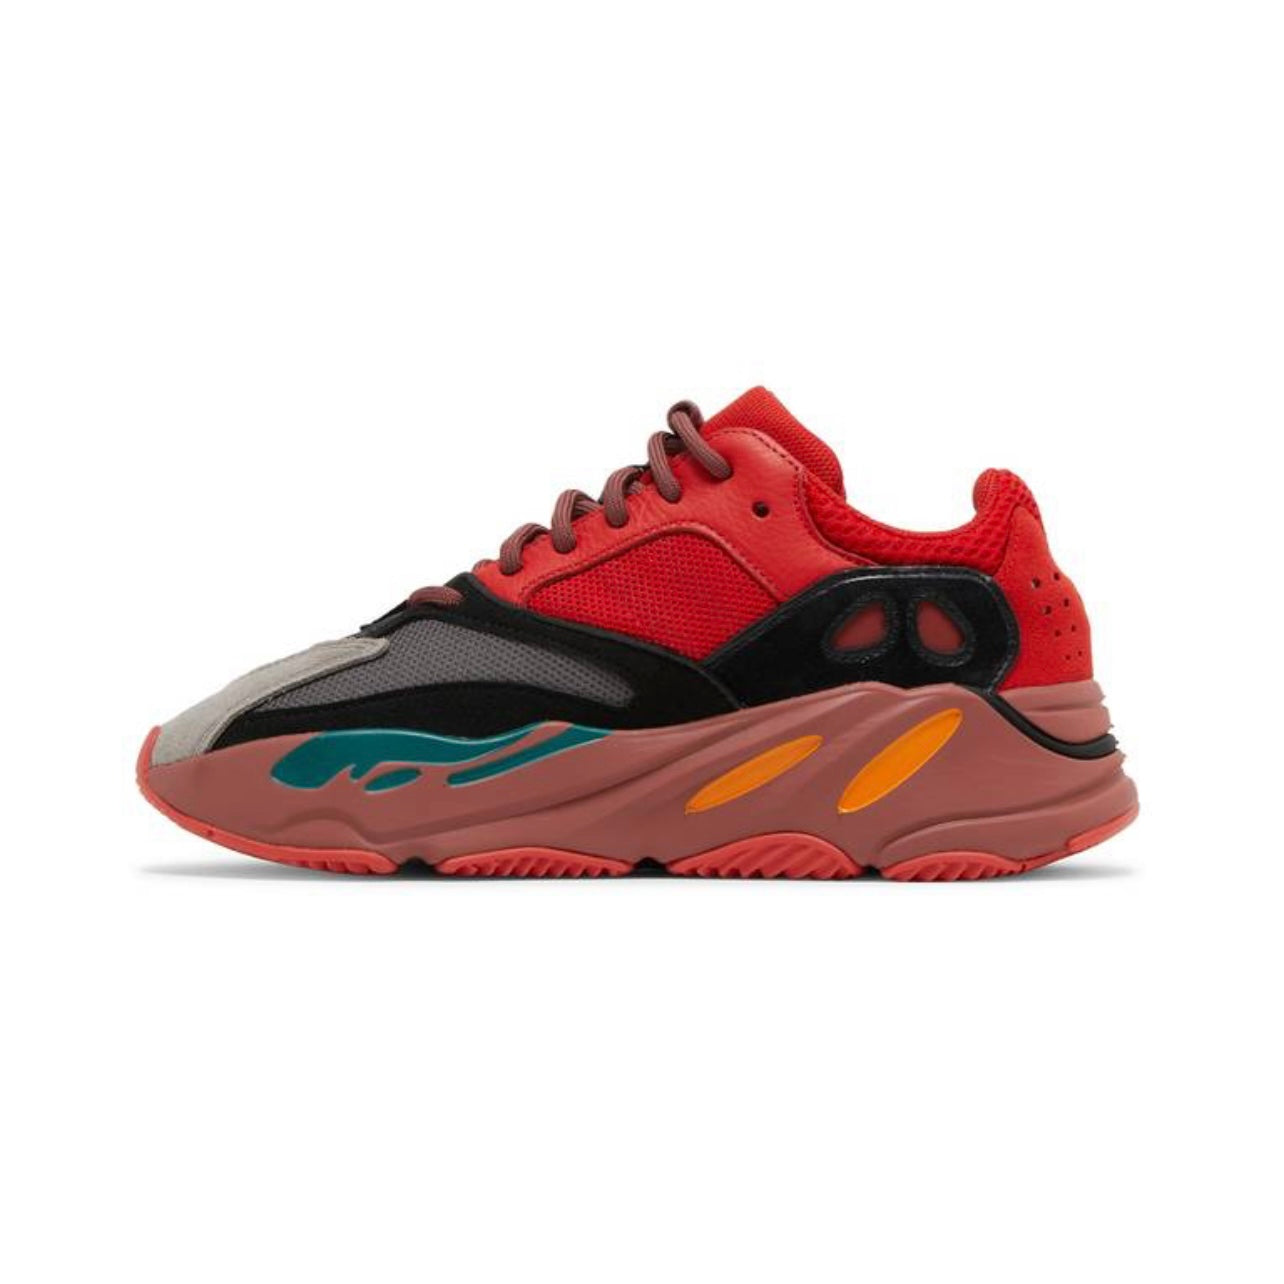 Adidas Yeezy Boost 700 "Hi-Res Red"